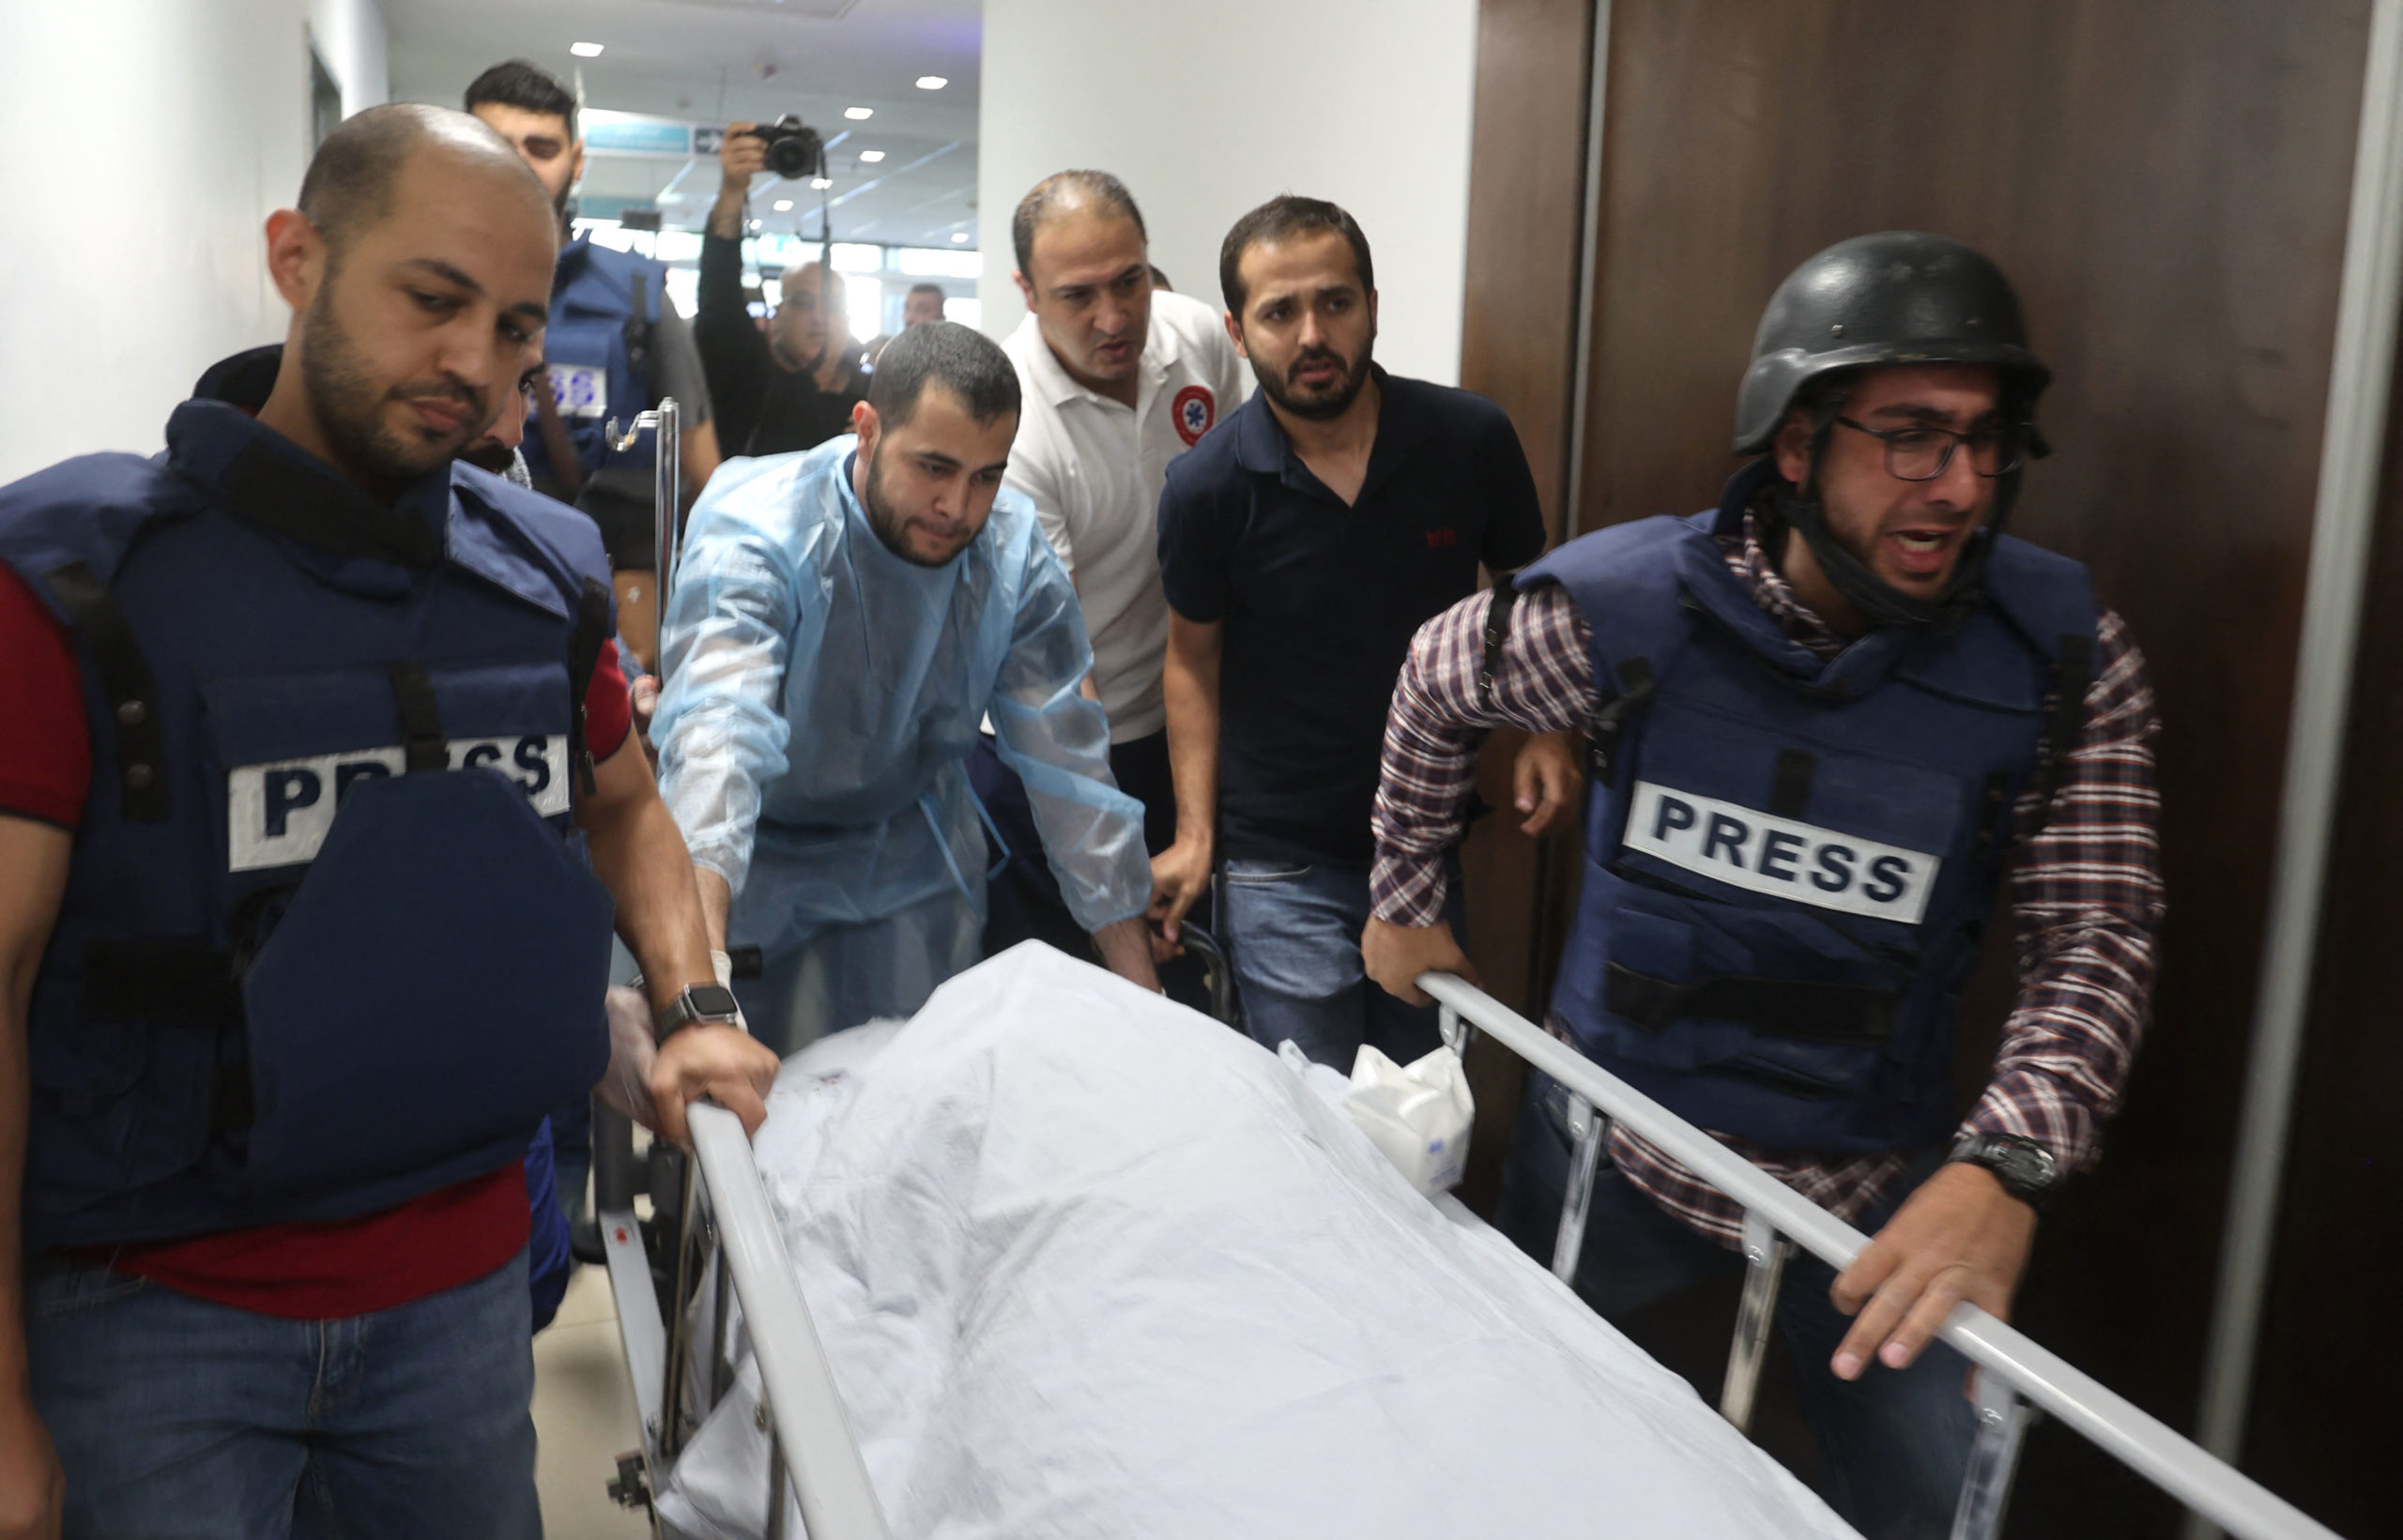 TOPSHOT - Palestinian cameraman Mujahed al-Saadi (C-L) of Palestine Today TV weeps as he escorts with other journalists the body of veteran Al-Jazeera reporter Shireen Abu Aqleh (Akleh), who was shot dead as she covered a raid on the West Bank's Jenin refugee camp, on May 11, 2022, at the hospital in Jenin. - Abu Aqleh, 51, a prominent figure in the channel's Arabic news service was shot dead on May 11 as she covered an Israeli army raid on Jenin refugee camp in the occupied West Bank. The Qatar-based TV channel said Israeli forces shot Abu Aqleh deliberately and "in cold blood" while Israeli Prime Minister Naftali Bennett said it was "likely" that Palestinian gunfire killed her.